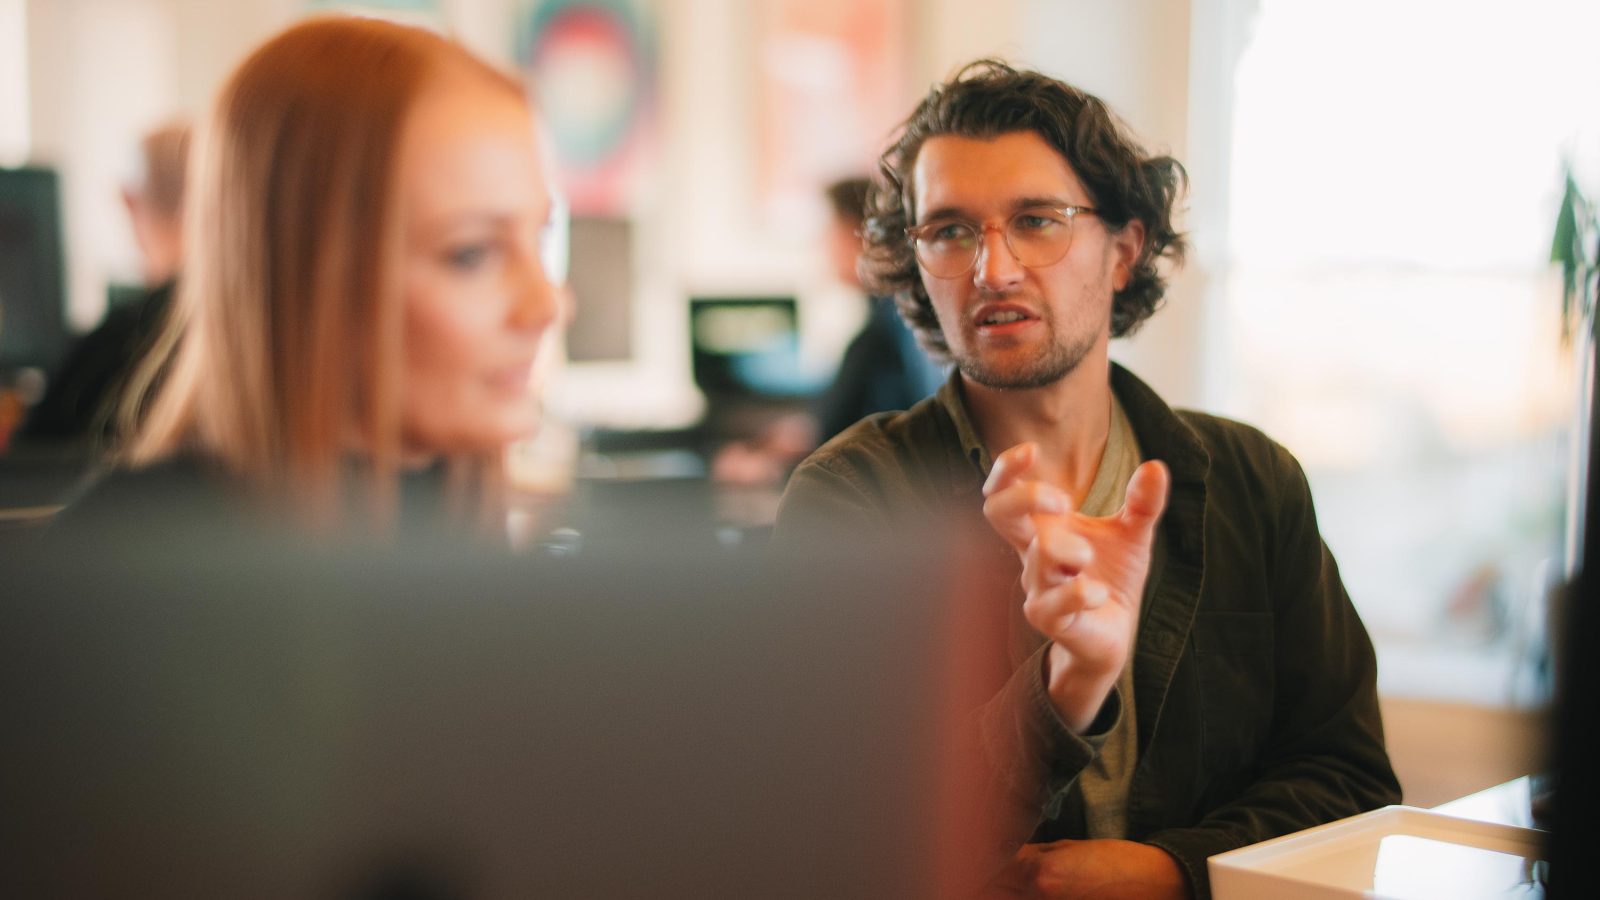 A man with curly hair gesturing while talking across the table to a focused redhead woman in an office setting, blurred computer screen displaying brand design in the foreground.